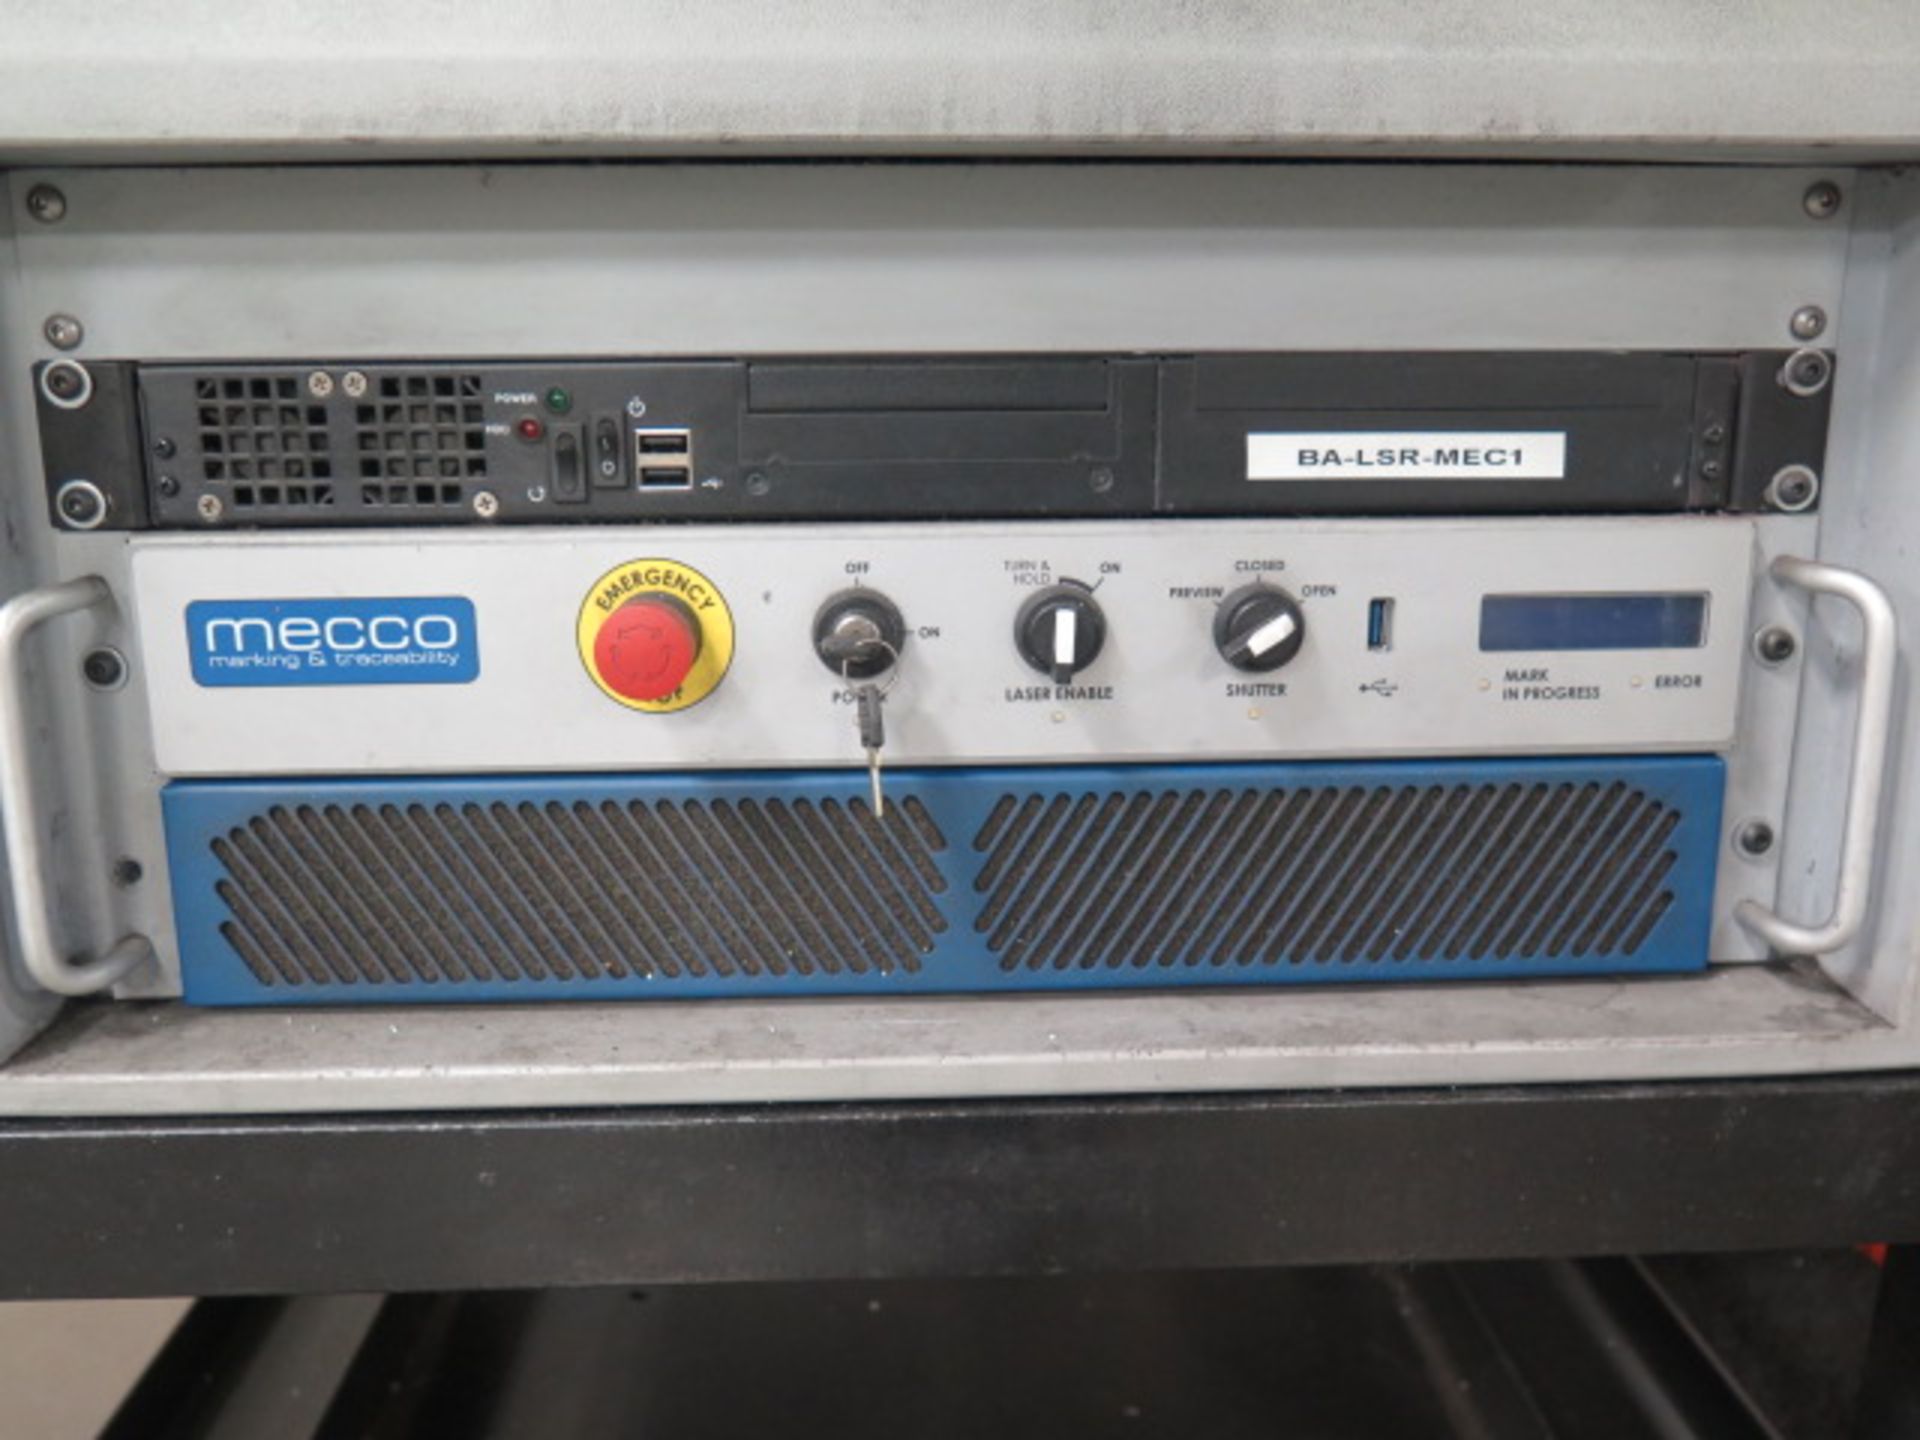 2014 Mecco Marking and Traceability “WinLase LEC-1 MeccoMark” 20kWFiber Laser Marking, SOLD AS IS - Image 8 of 10